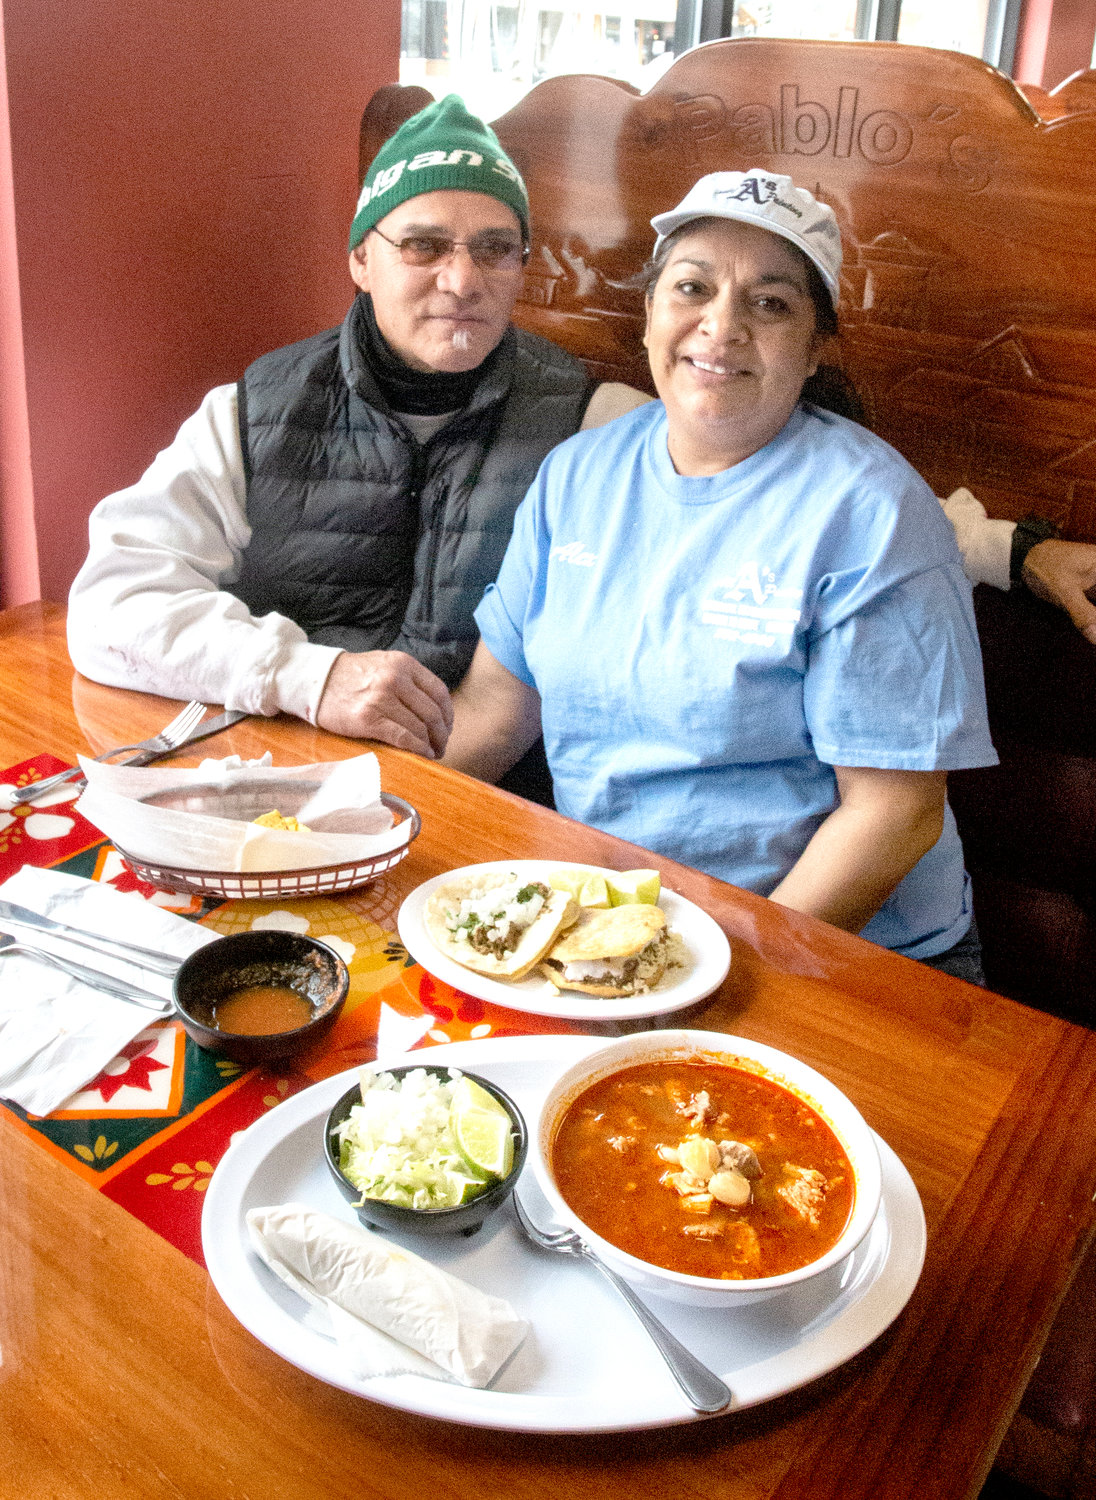 Alex and Tina Alvarado, owners of All A’s Painting in Lansing, enjoy brunch at Pablo’s Eastside.